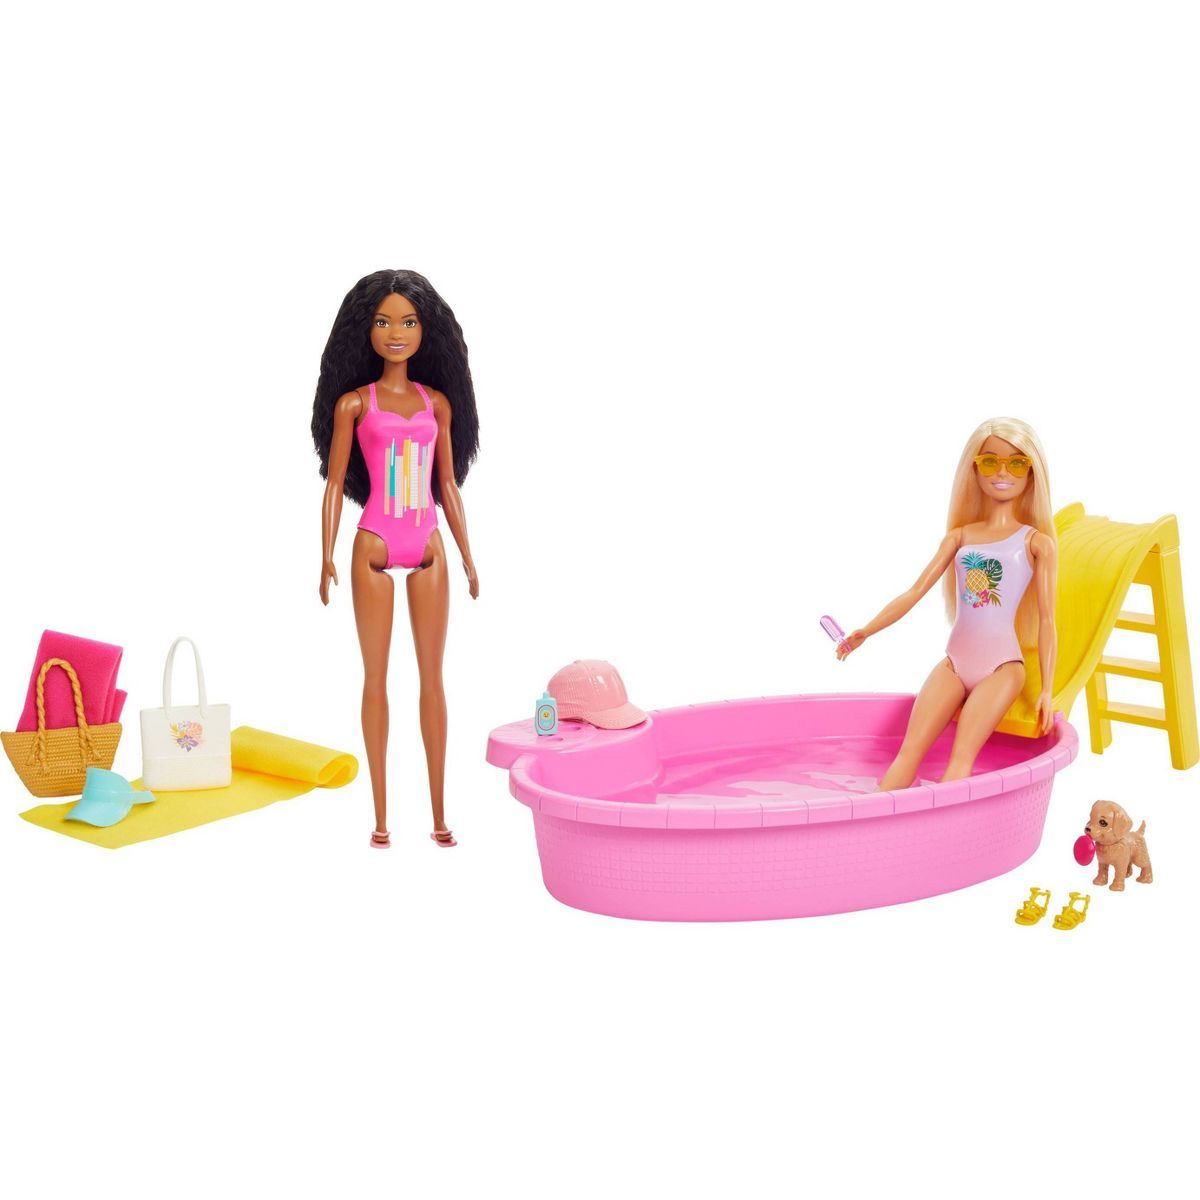 Two Barbie Dolls with Pool, Clothes and Barbie Car (Target Exclusive) | Target